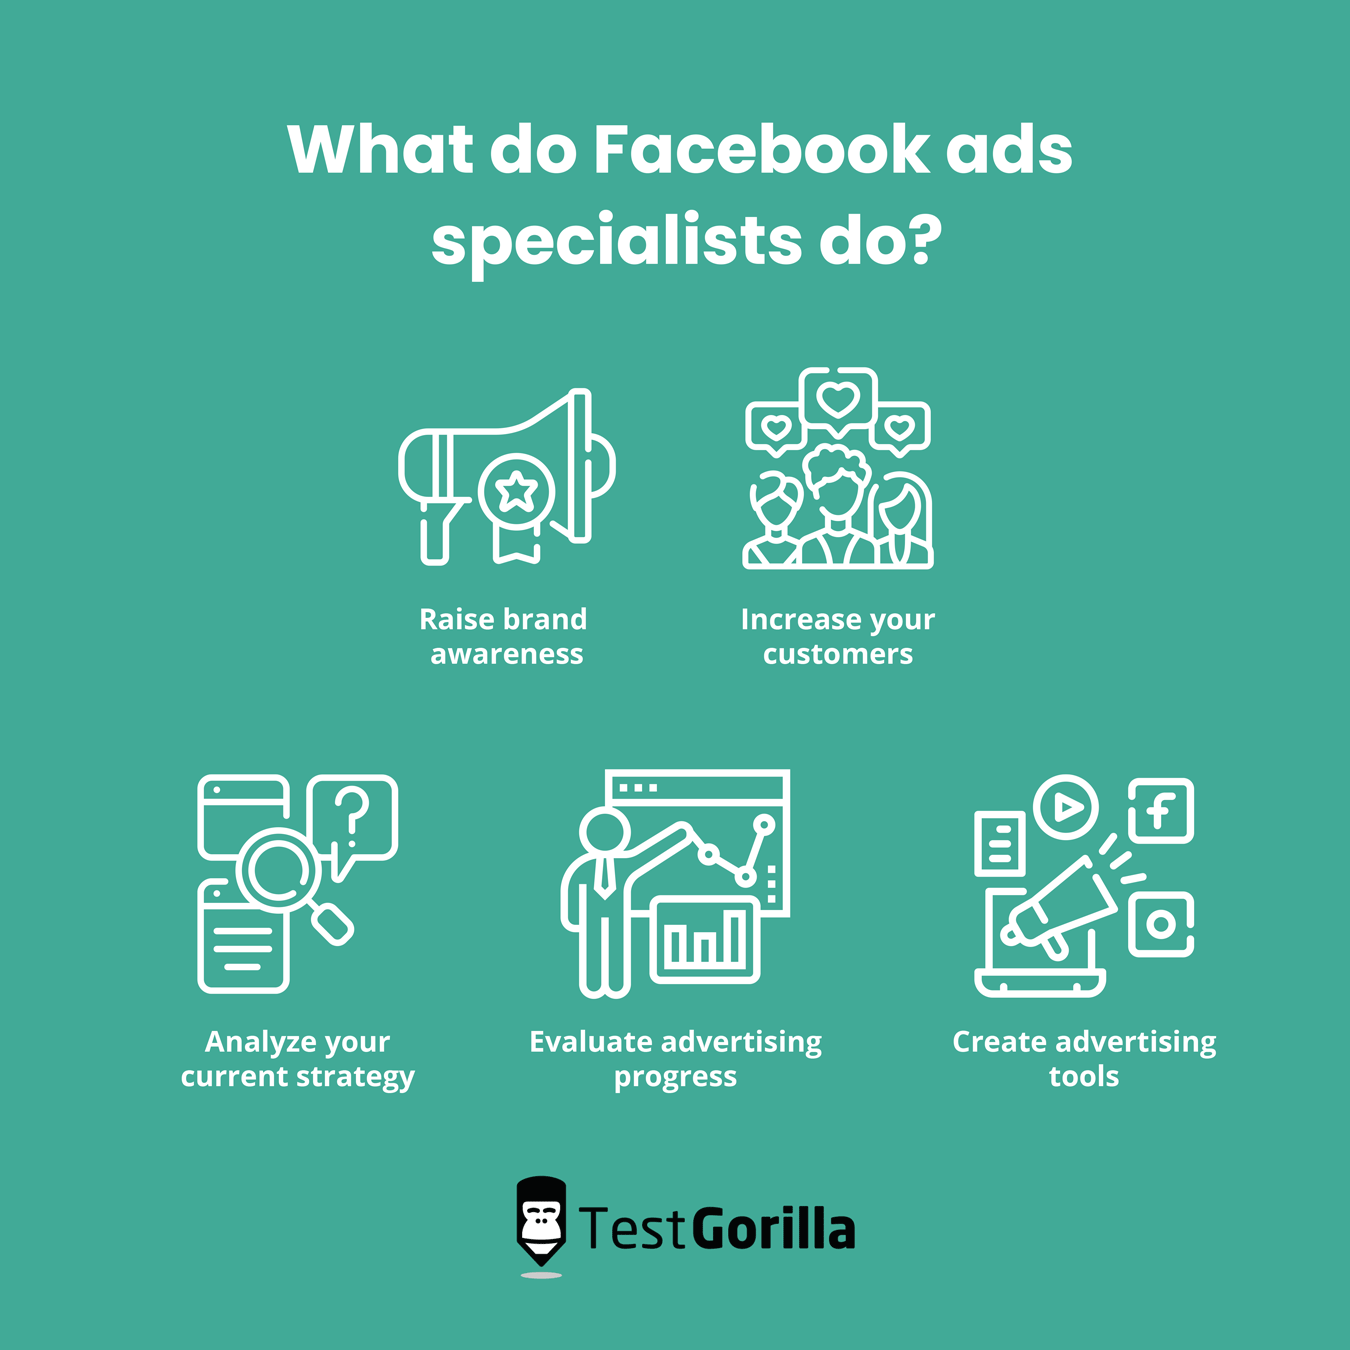 what do Facebook ads specialists do